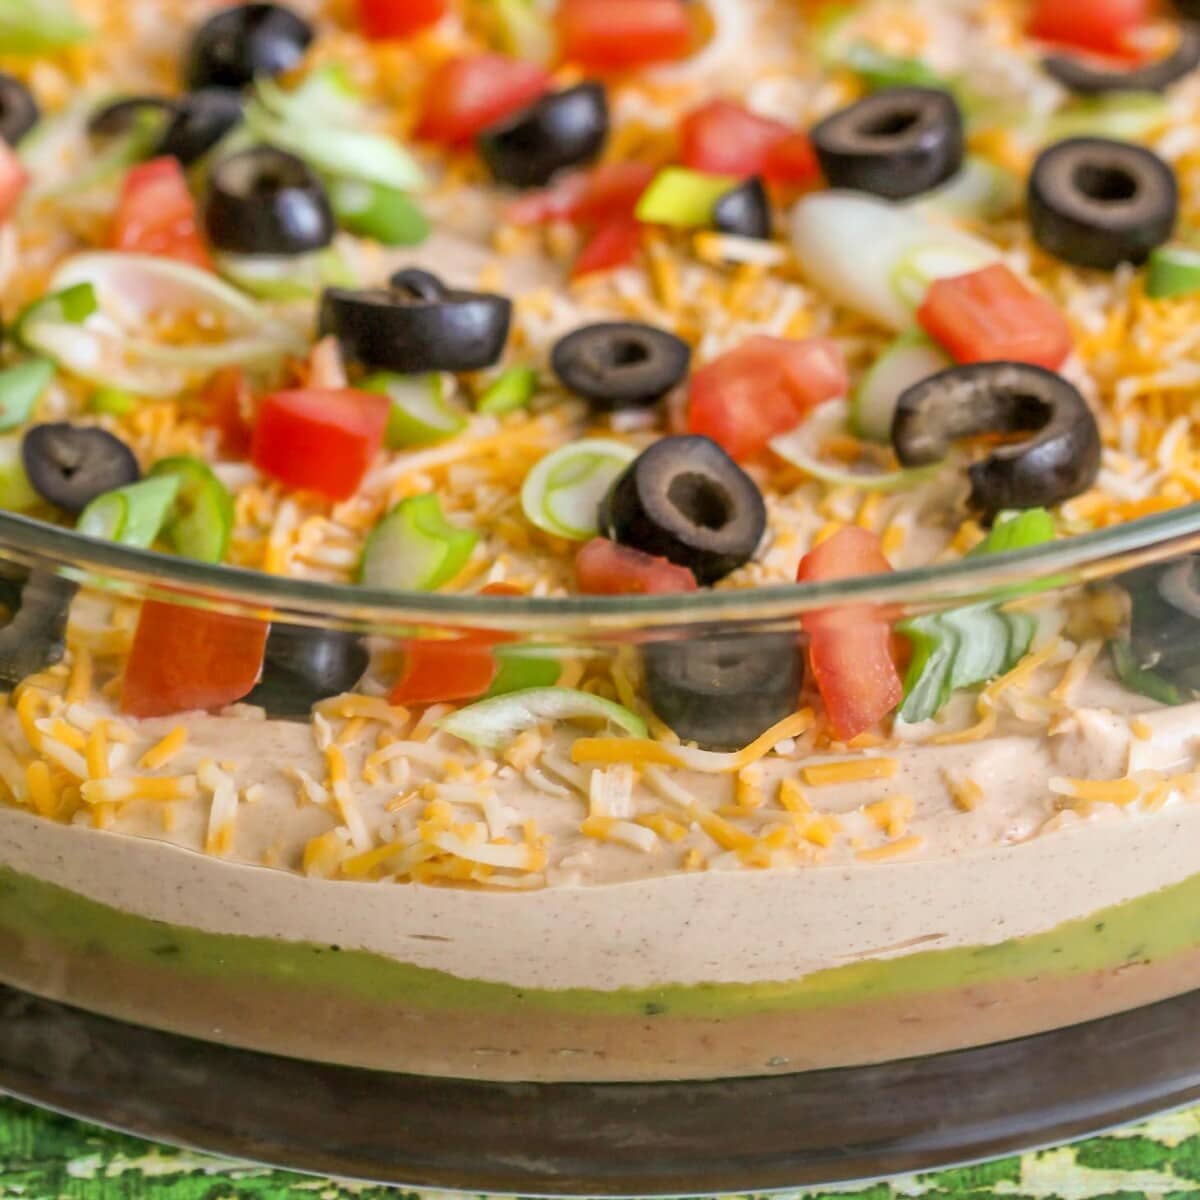 7 Layer Bean Dip served in a glass dish.